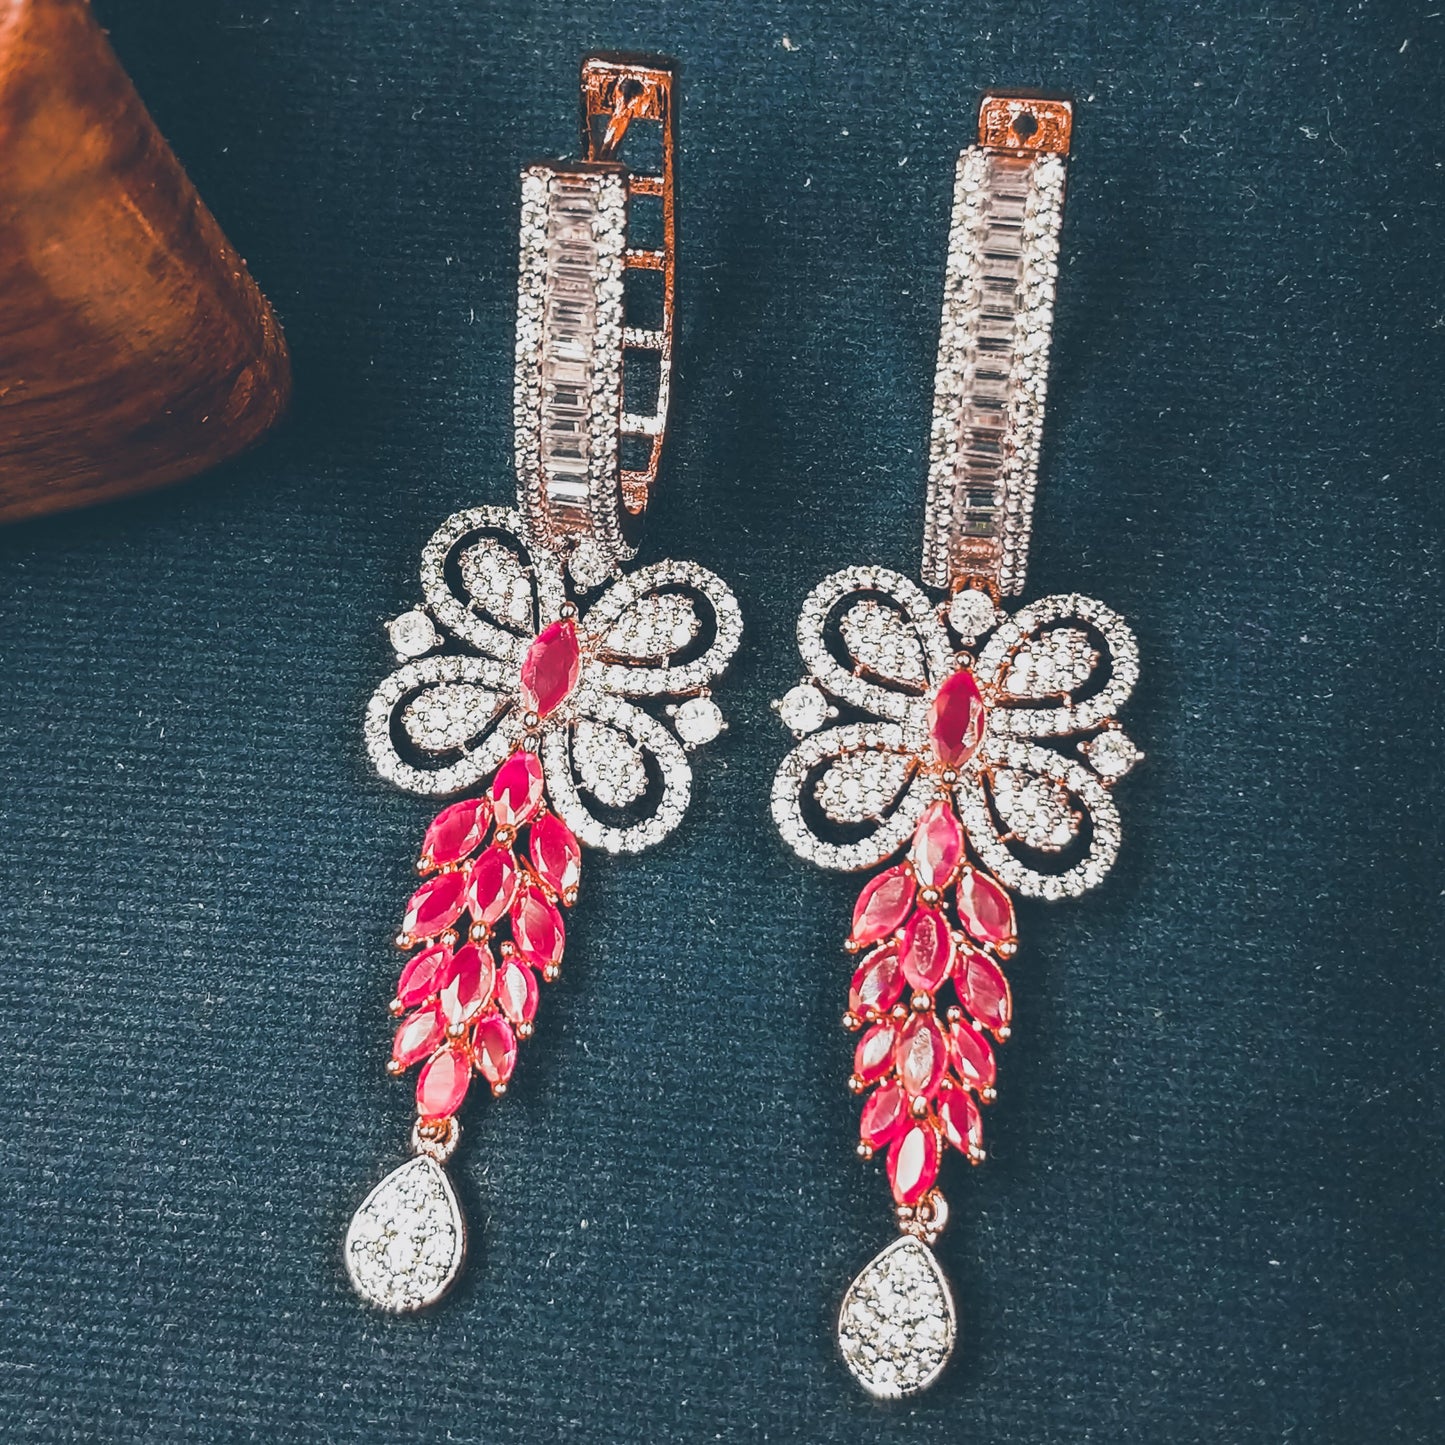 HANDCRAFTED LUXURY FASHION JEWELLERY BY JAUHRI EARRINGS-OLIVIA PINK